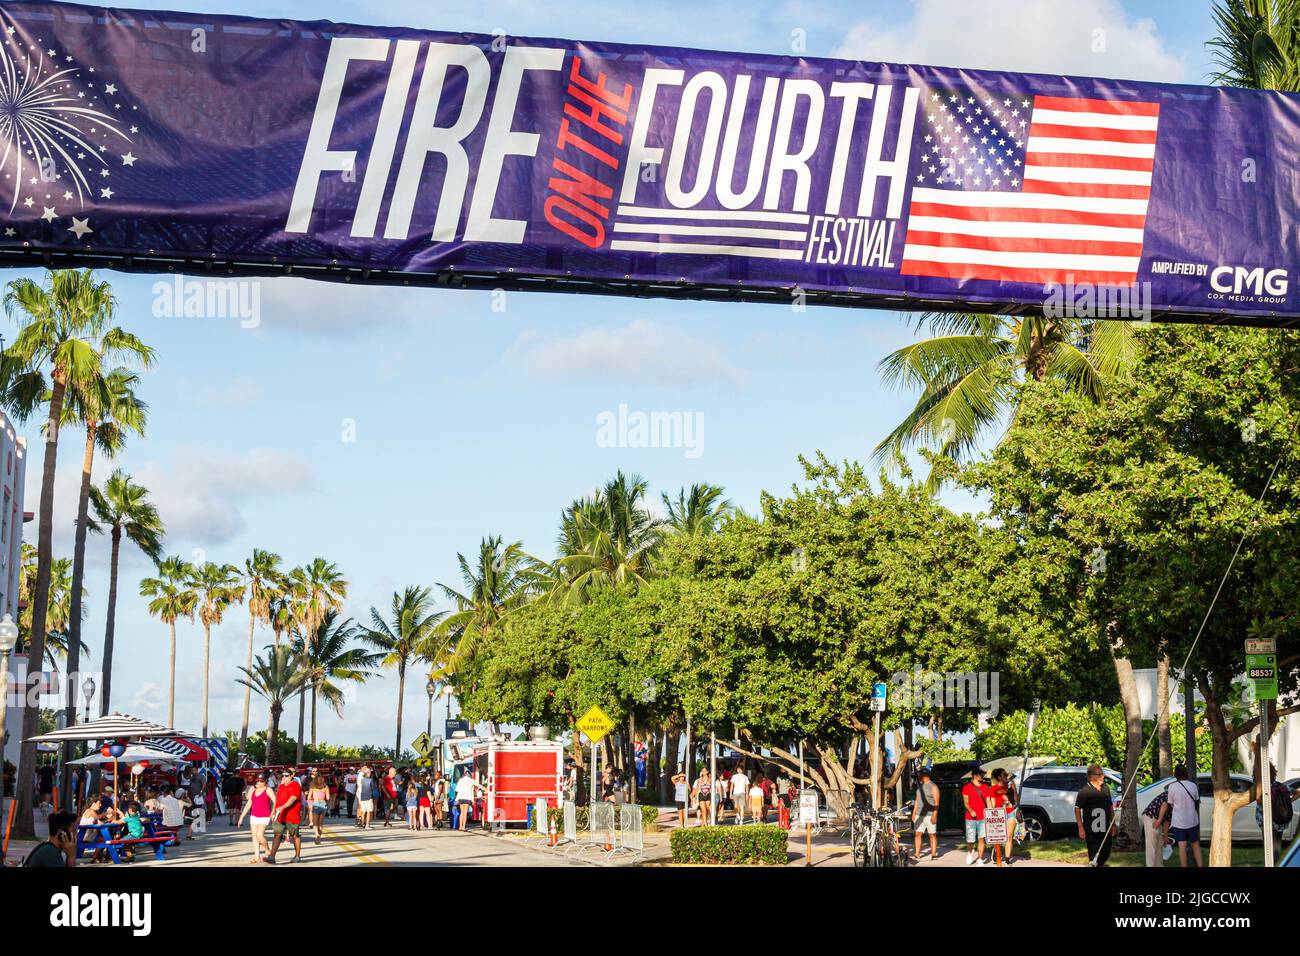 Miami Beach Florida,Ocean Terrace Fire on the Fourth 4th of July Festival event celebration,banner Stock Photo